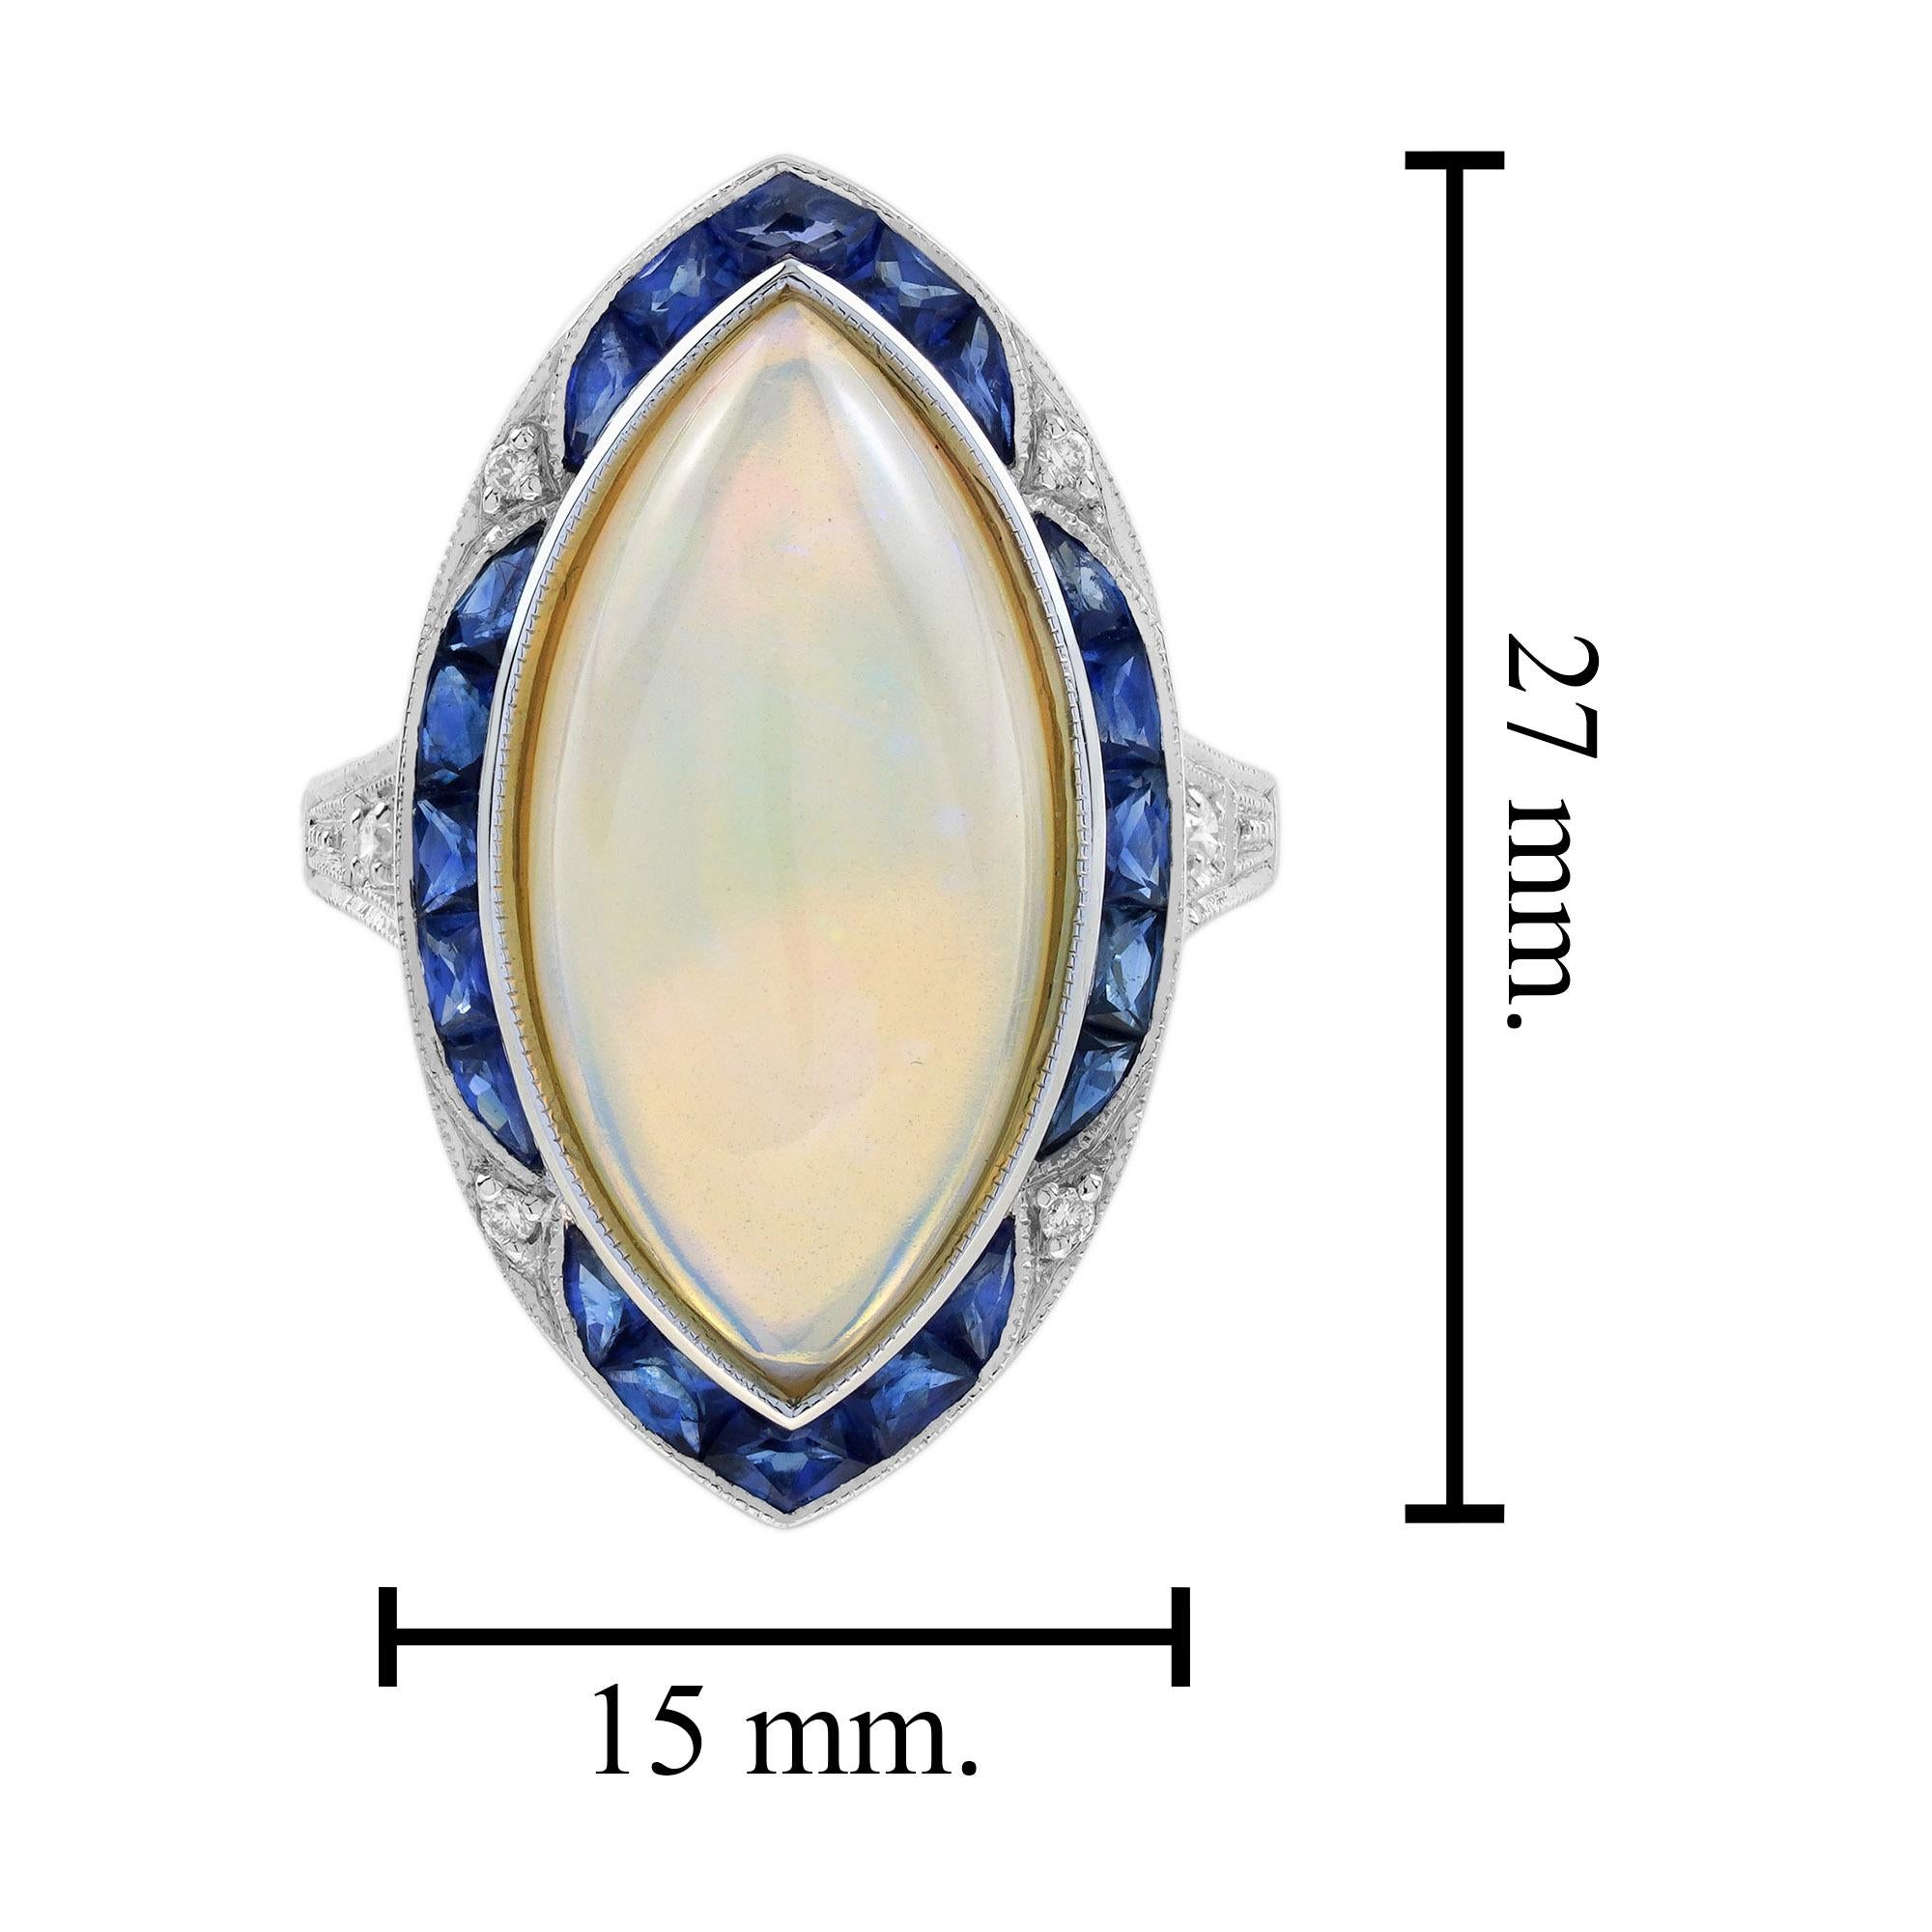 6.55 Ct. Opal Blue Sapphire Diamond Art Deco Style Cocktail Ring in 18K Gold 4